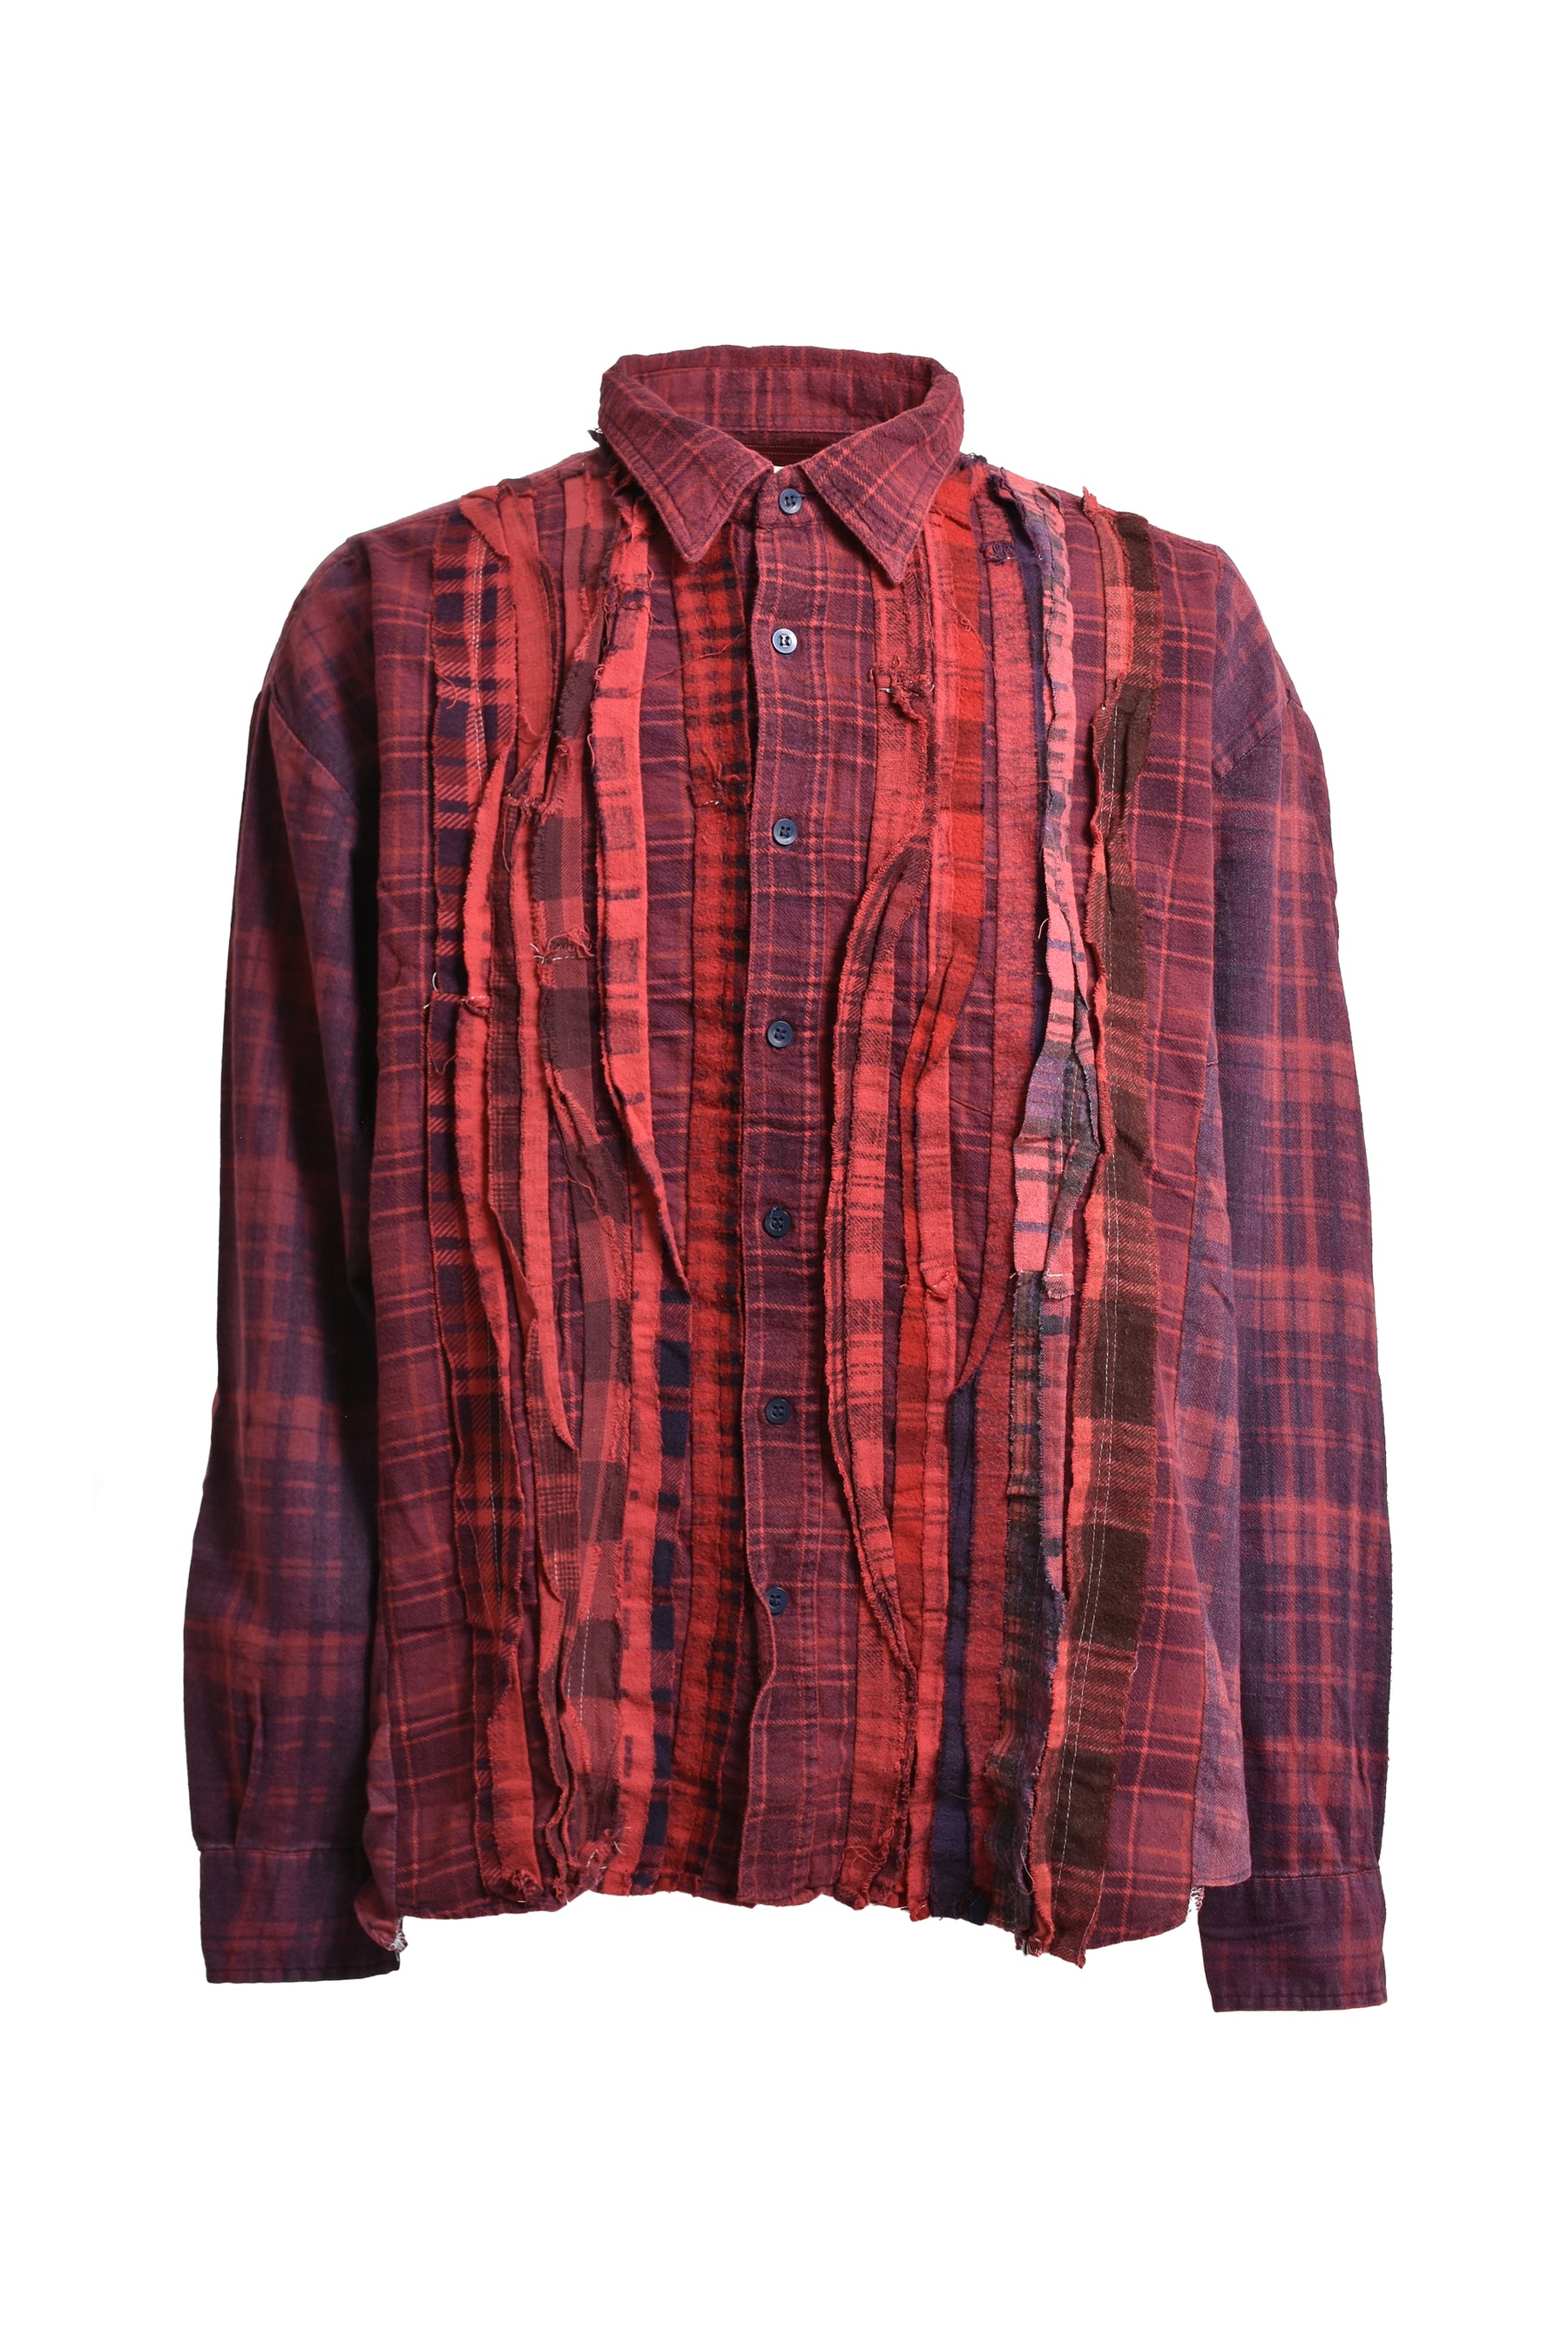 FLANNEL SHIRT -> RIBBON WIDE SHIRT / OVER DYE / RED